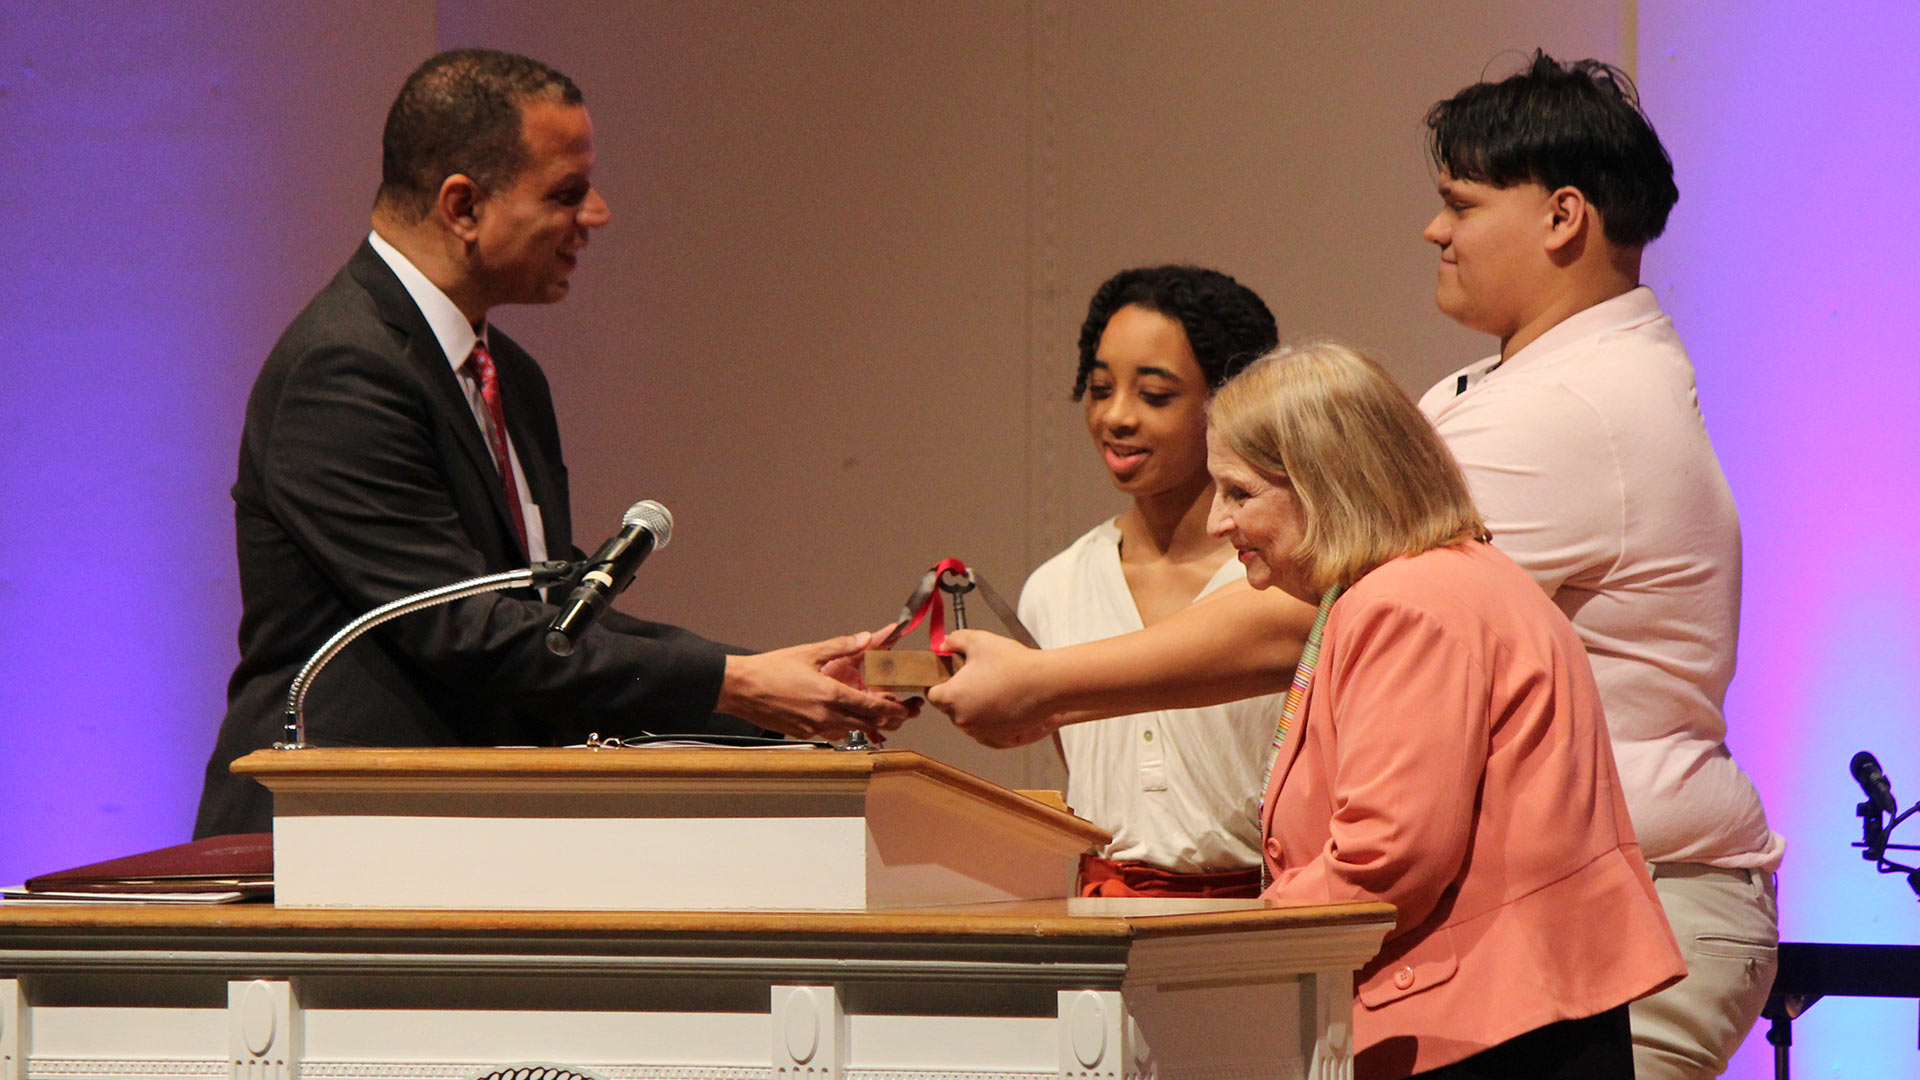 Tinyah Ervin '23 and Michael Mesa '23 join Trustee Chair Ione Taylor '76 to present the keys to the College.